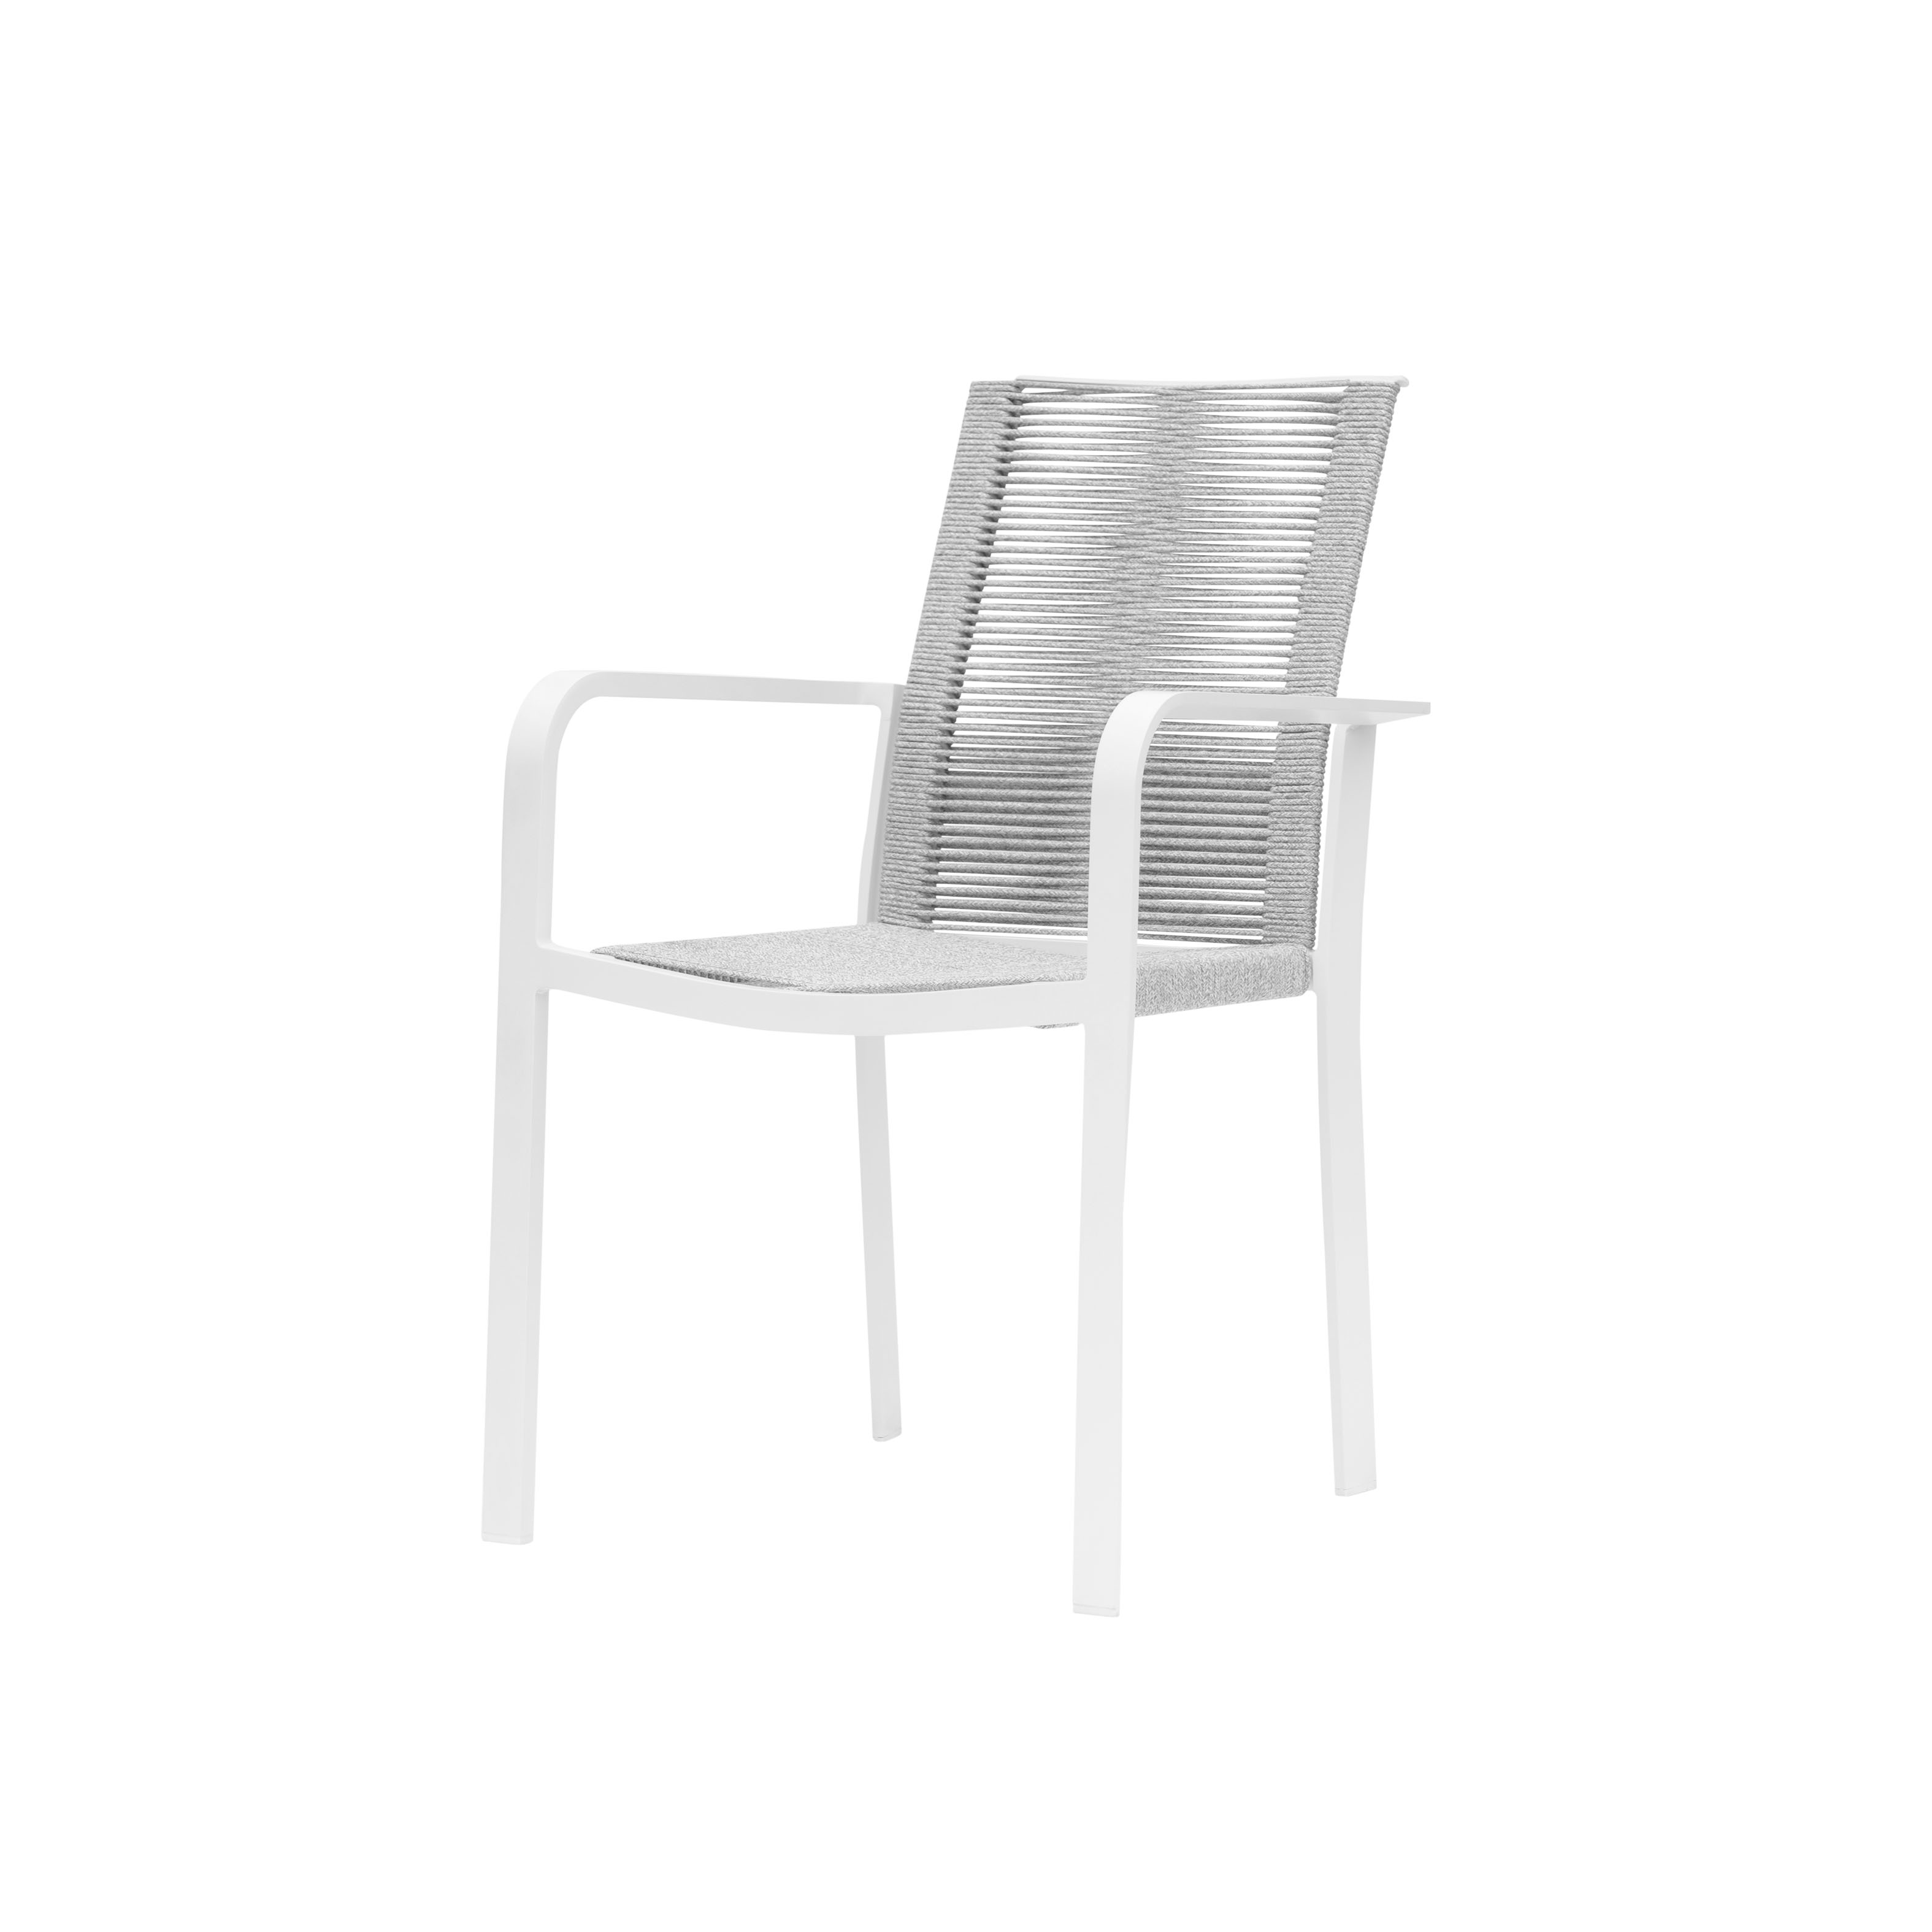 Linz rope dining chair Featured Image